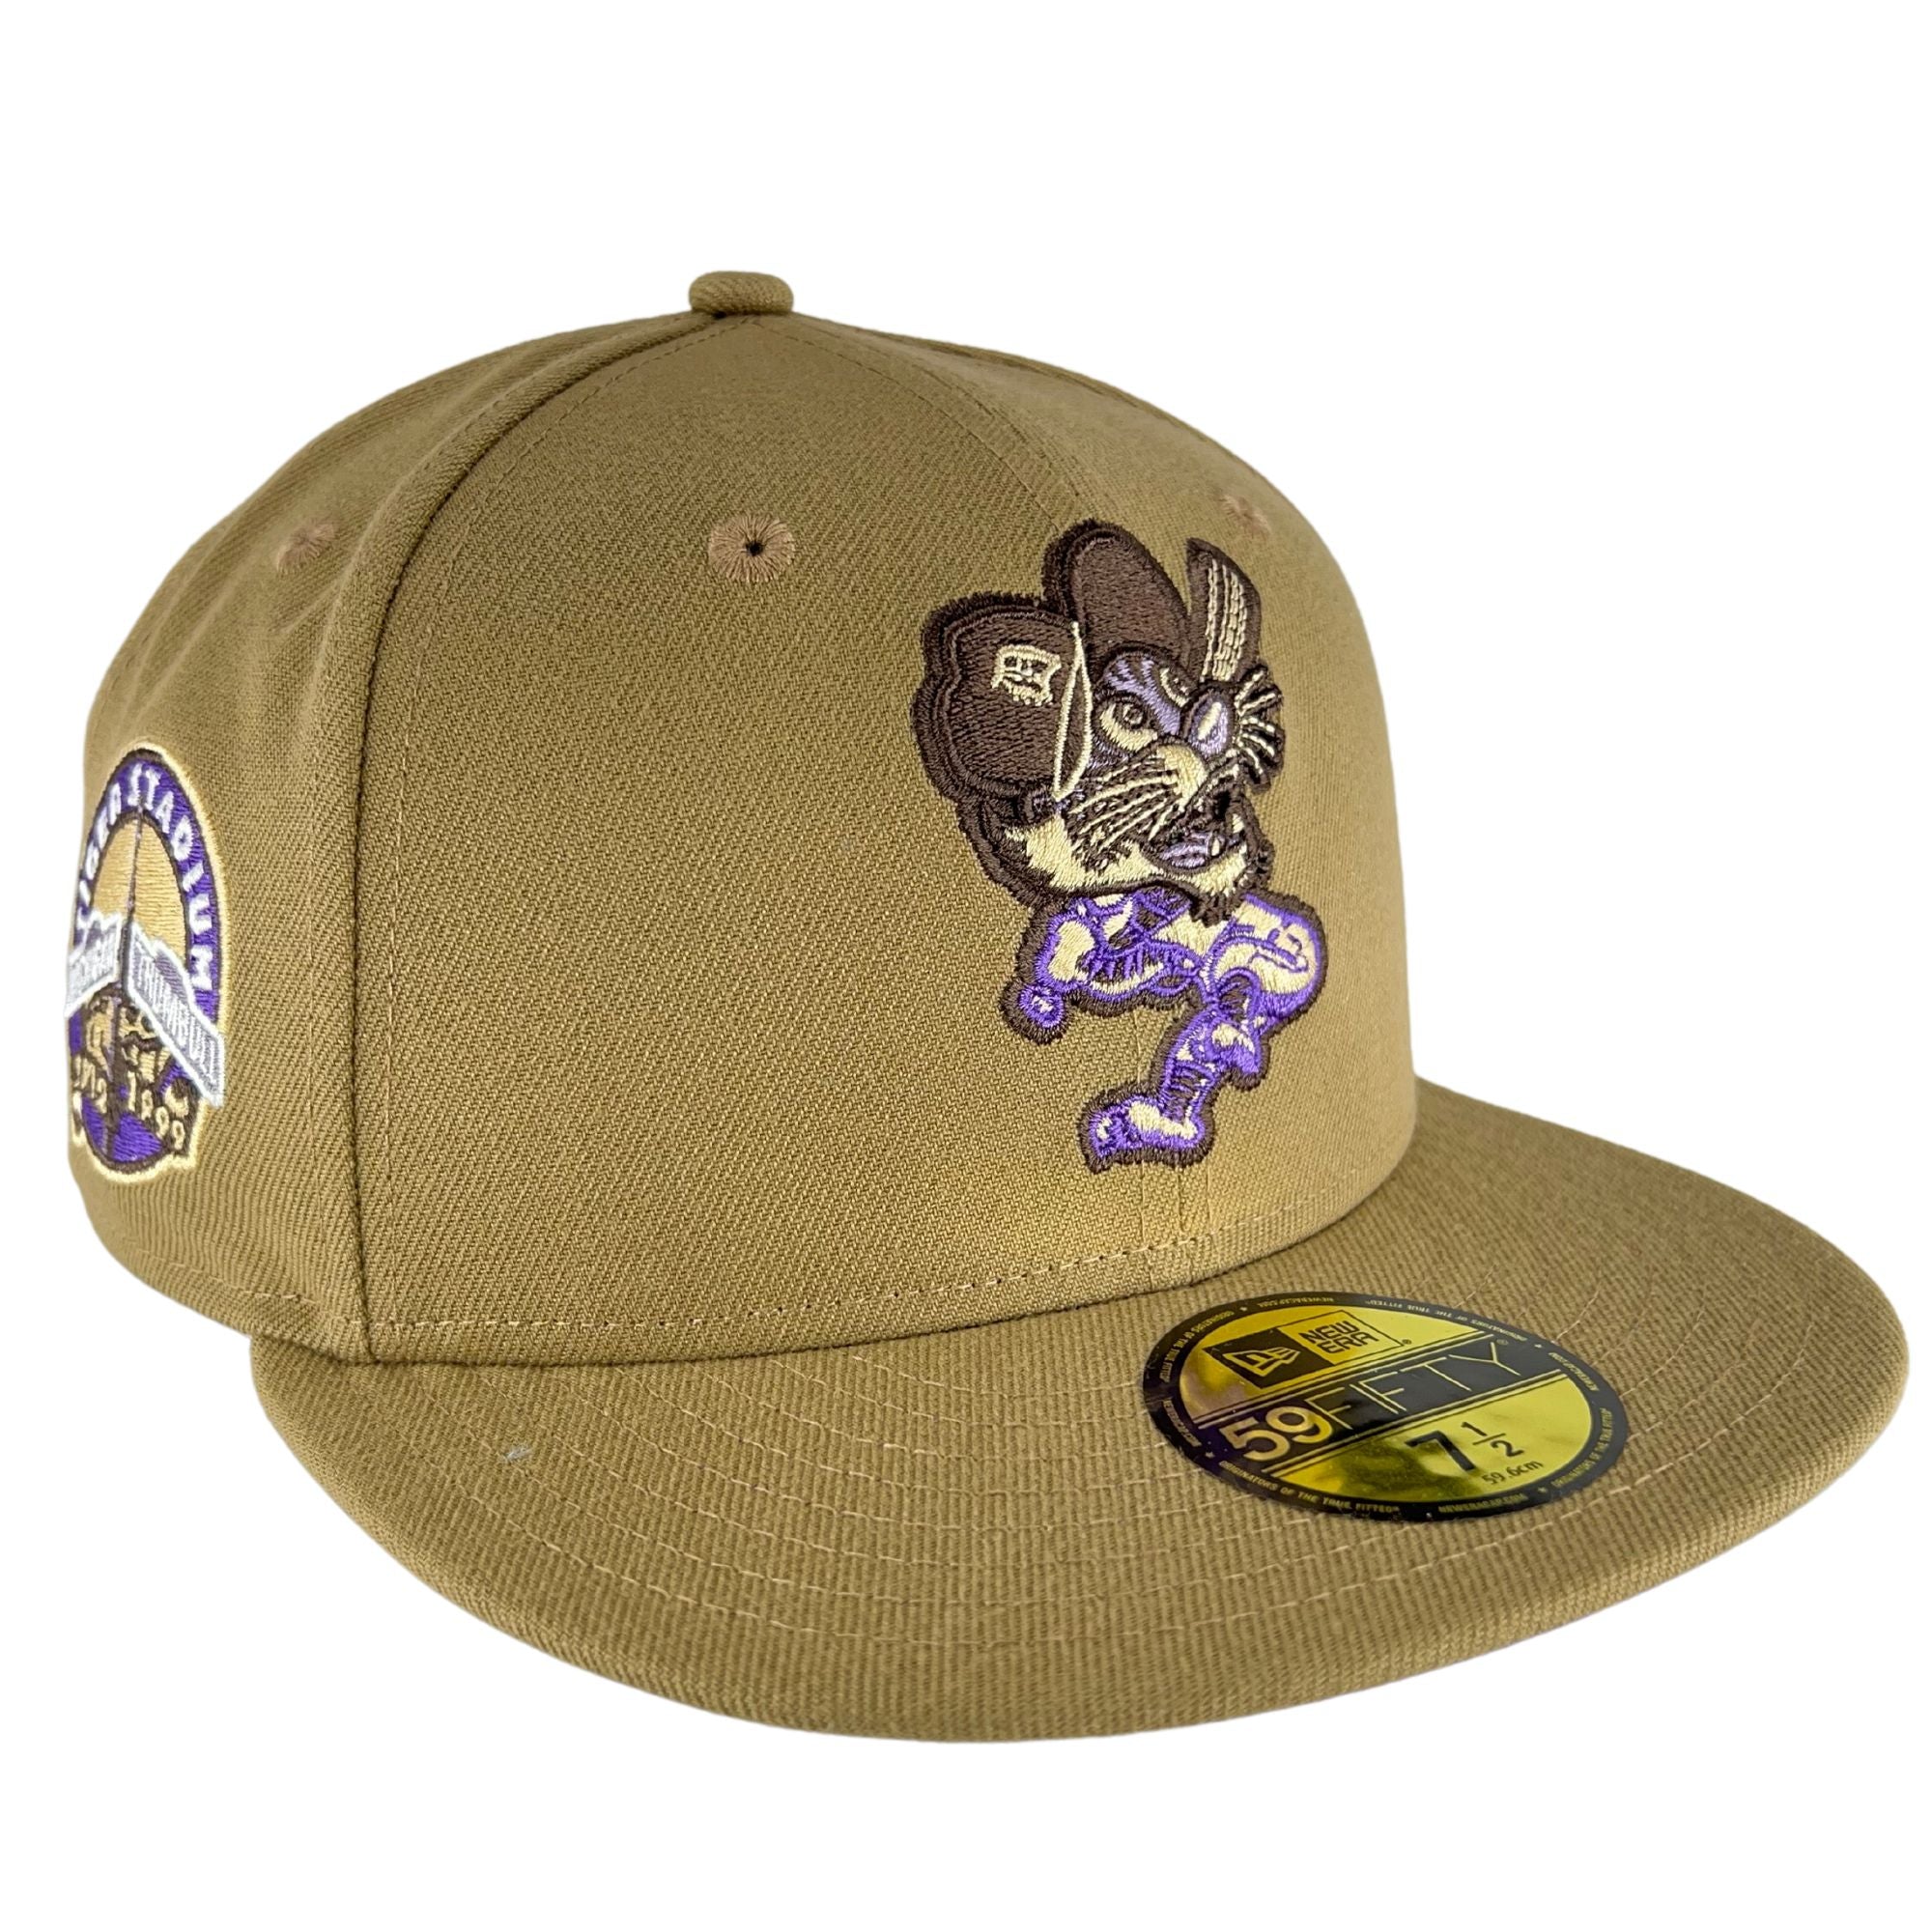 Light Pink Detroit Tigers Purple Bottom 59fifty New Era Fitted